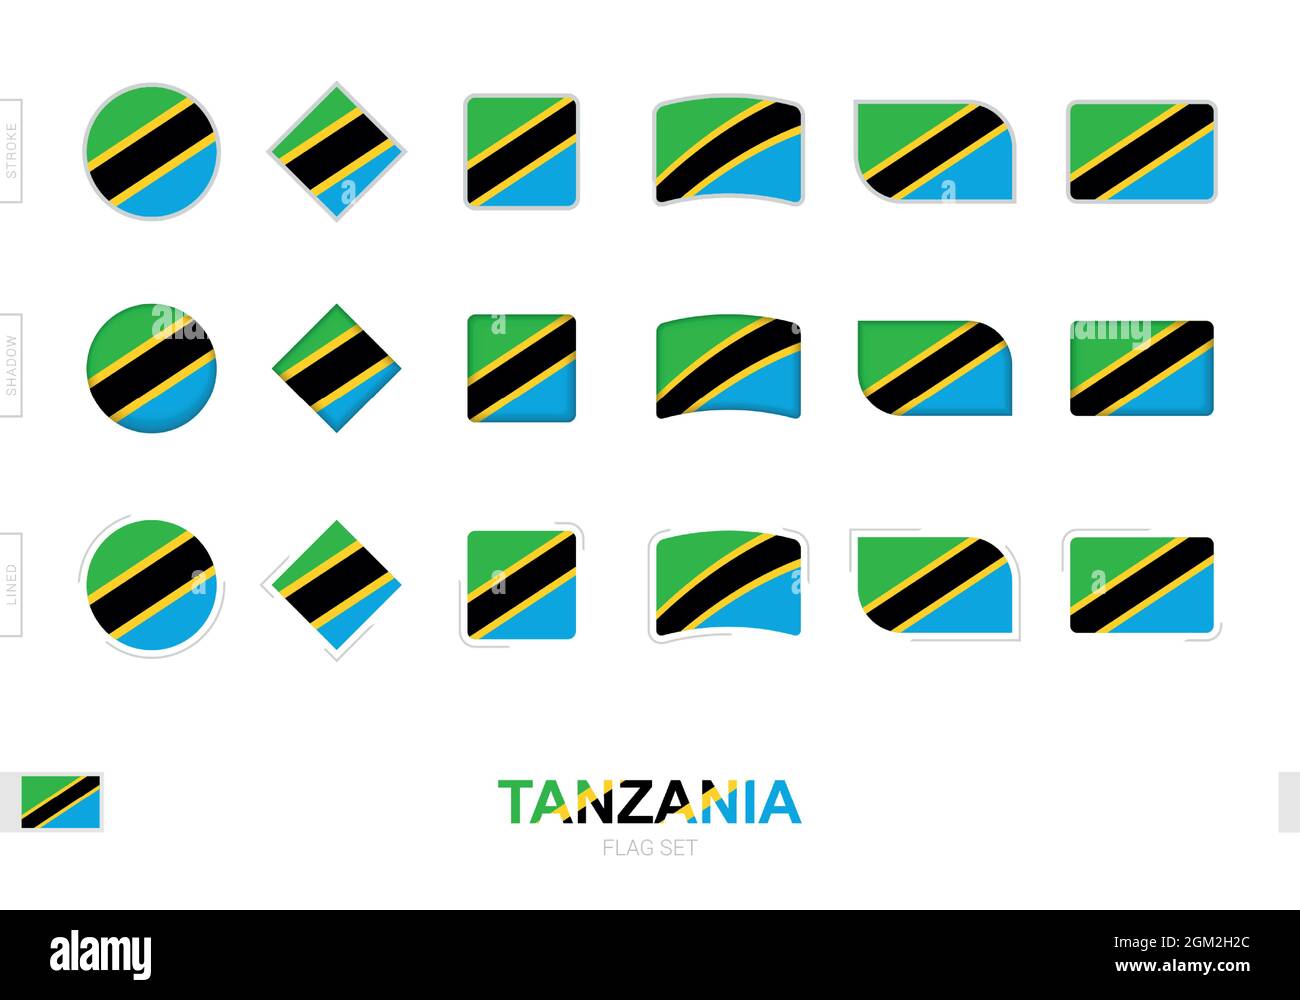 Tanzania flag set, simple flags of Tanzania with three different effects. Vector illustration. Stock Vector